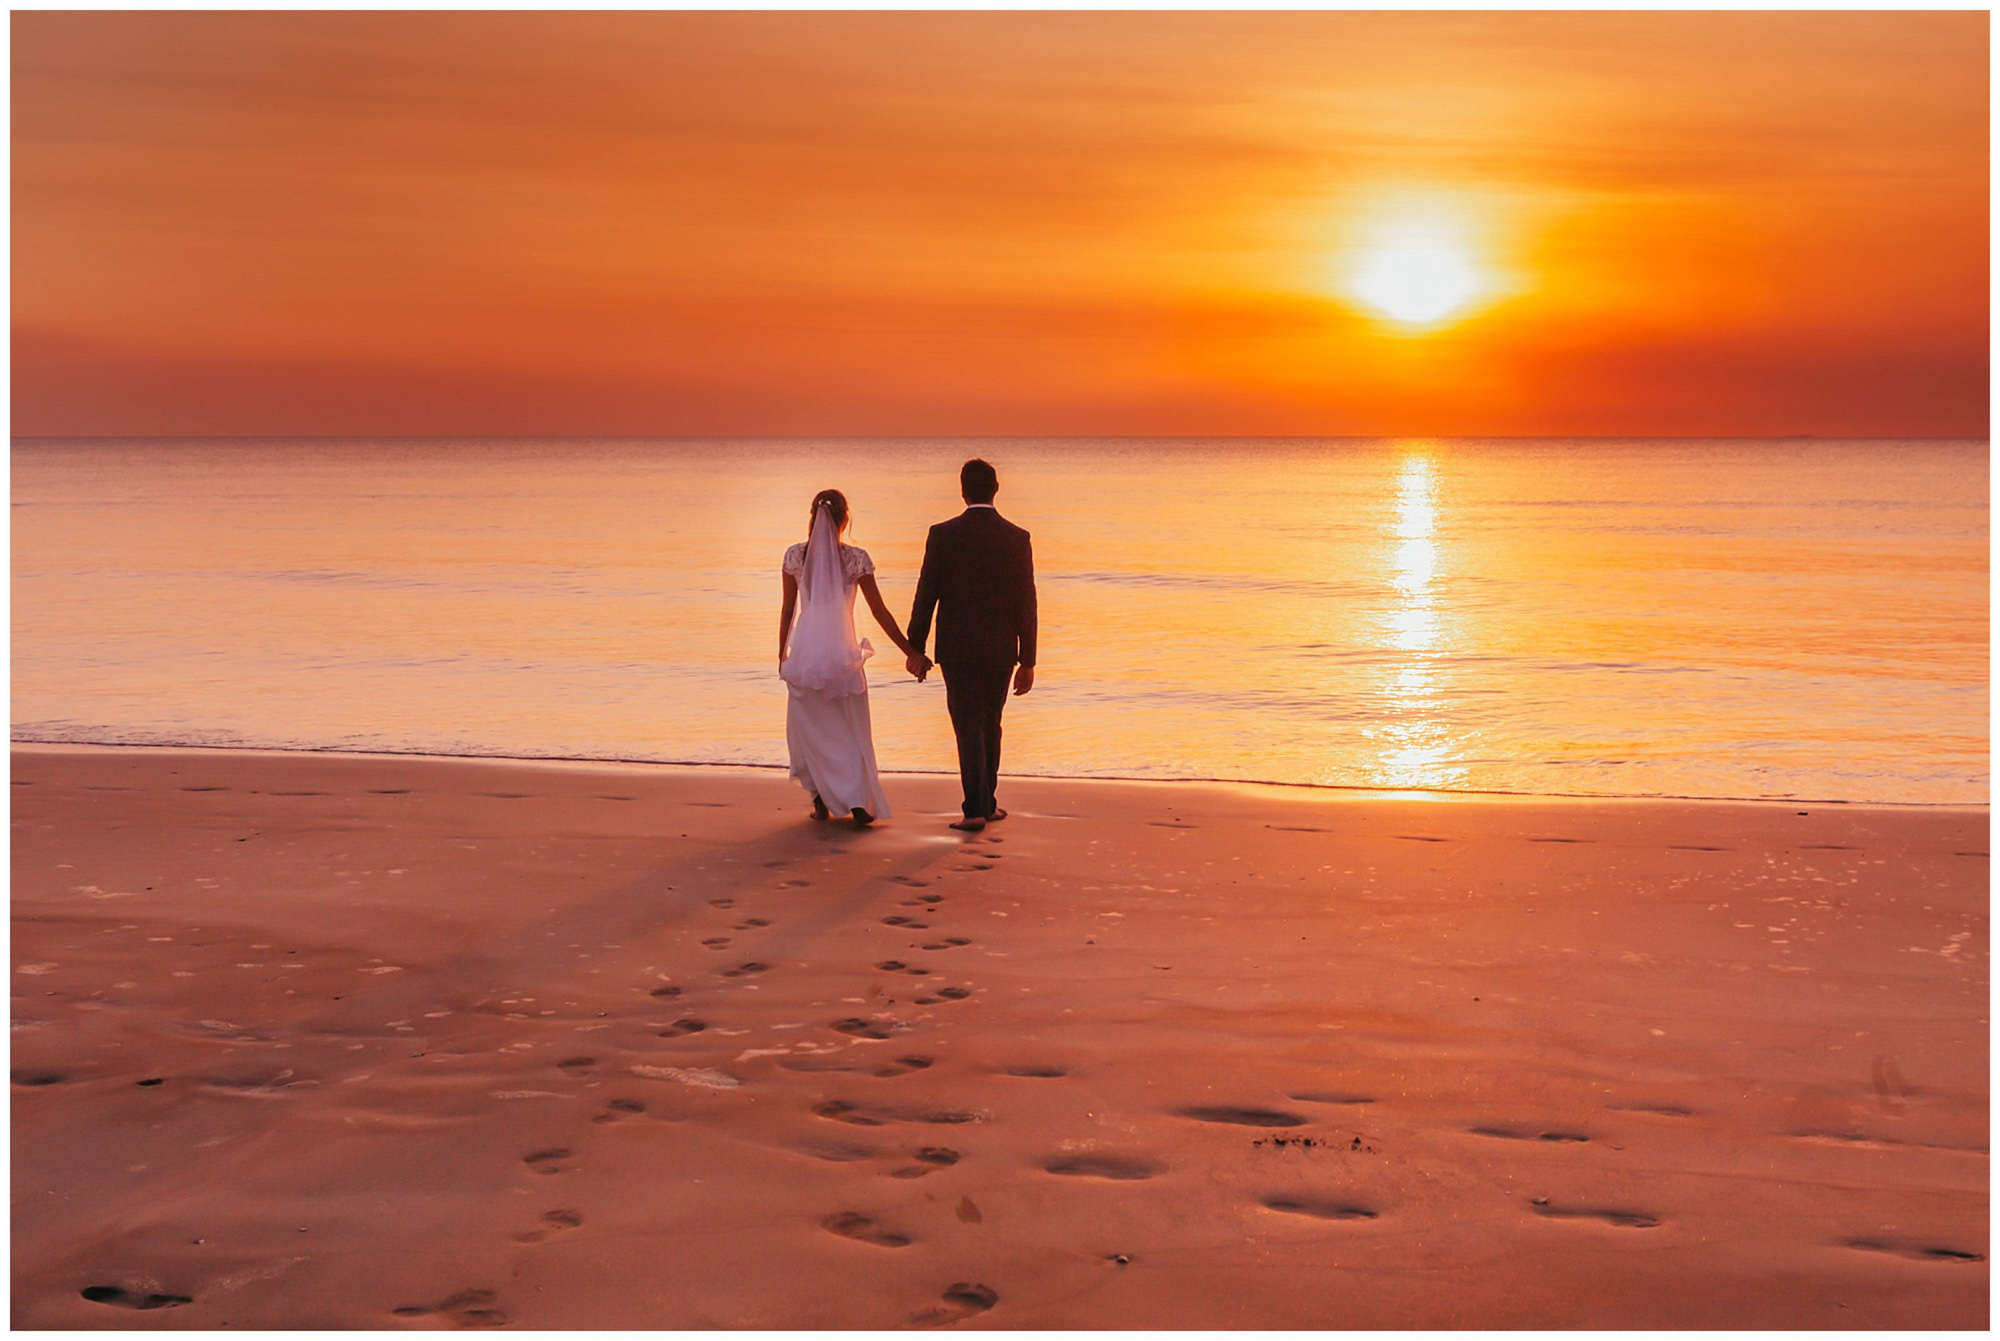 darwin sunset bright orange against a white wedding dress and grooms black suit